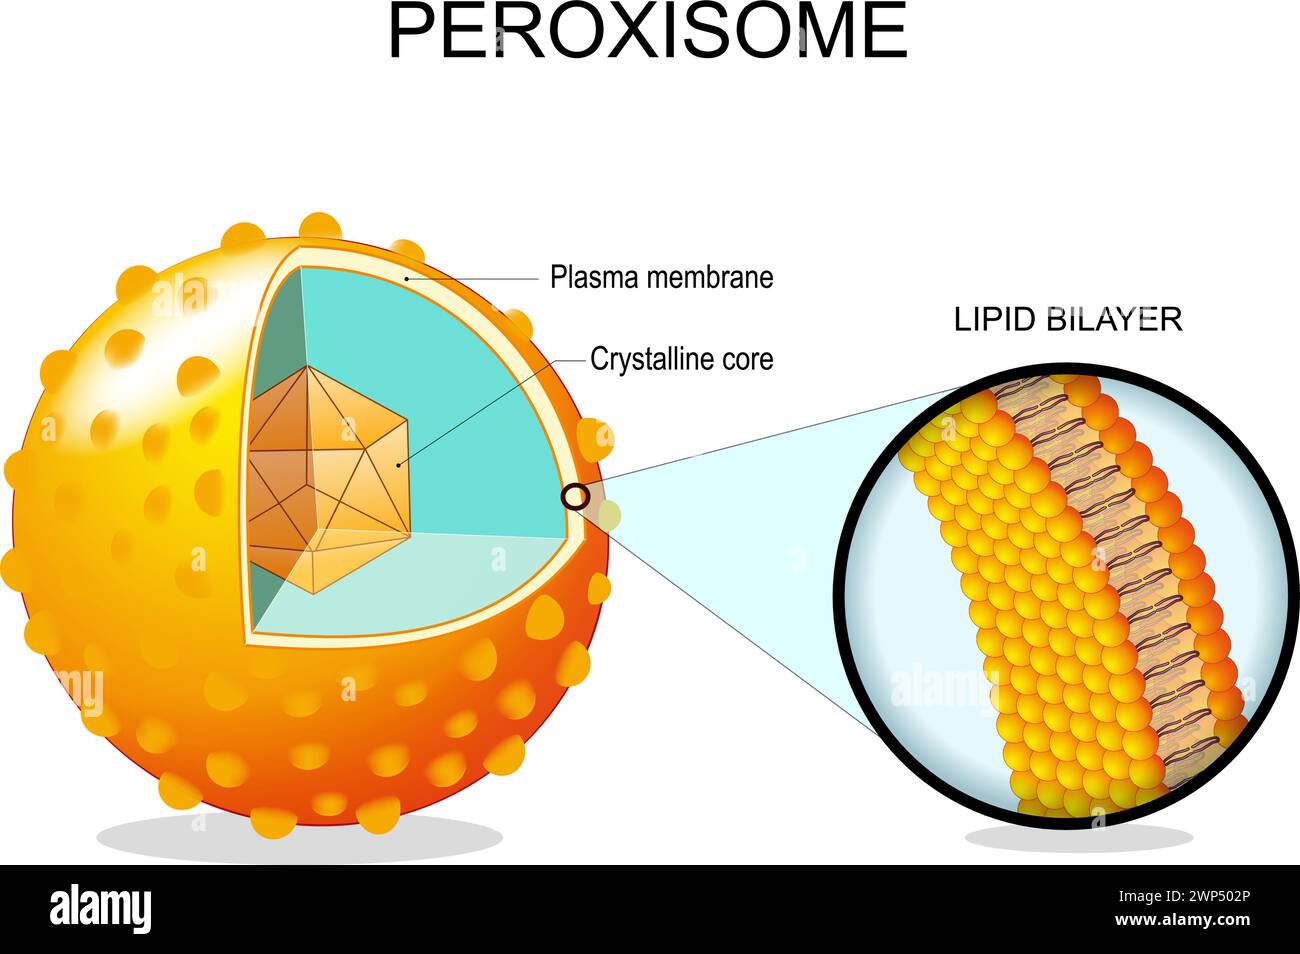 Peroxisome anatomy. Cross section of a cell organelle. Close-up of a Lipid bilayer Plasma membrane, Crystalline core, transport proteins. Vector illus Stock Vector